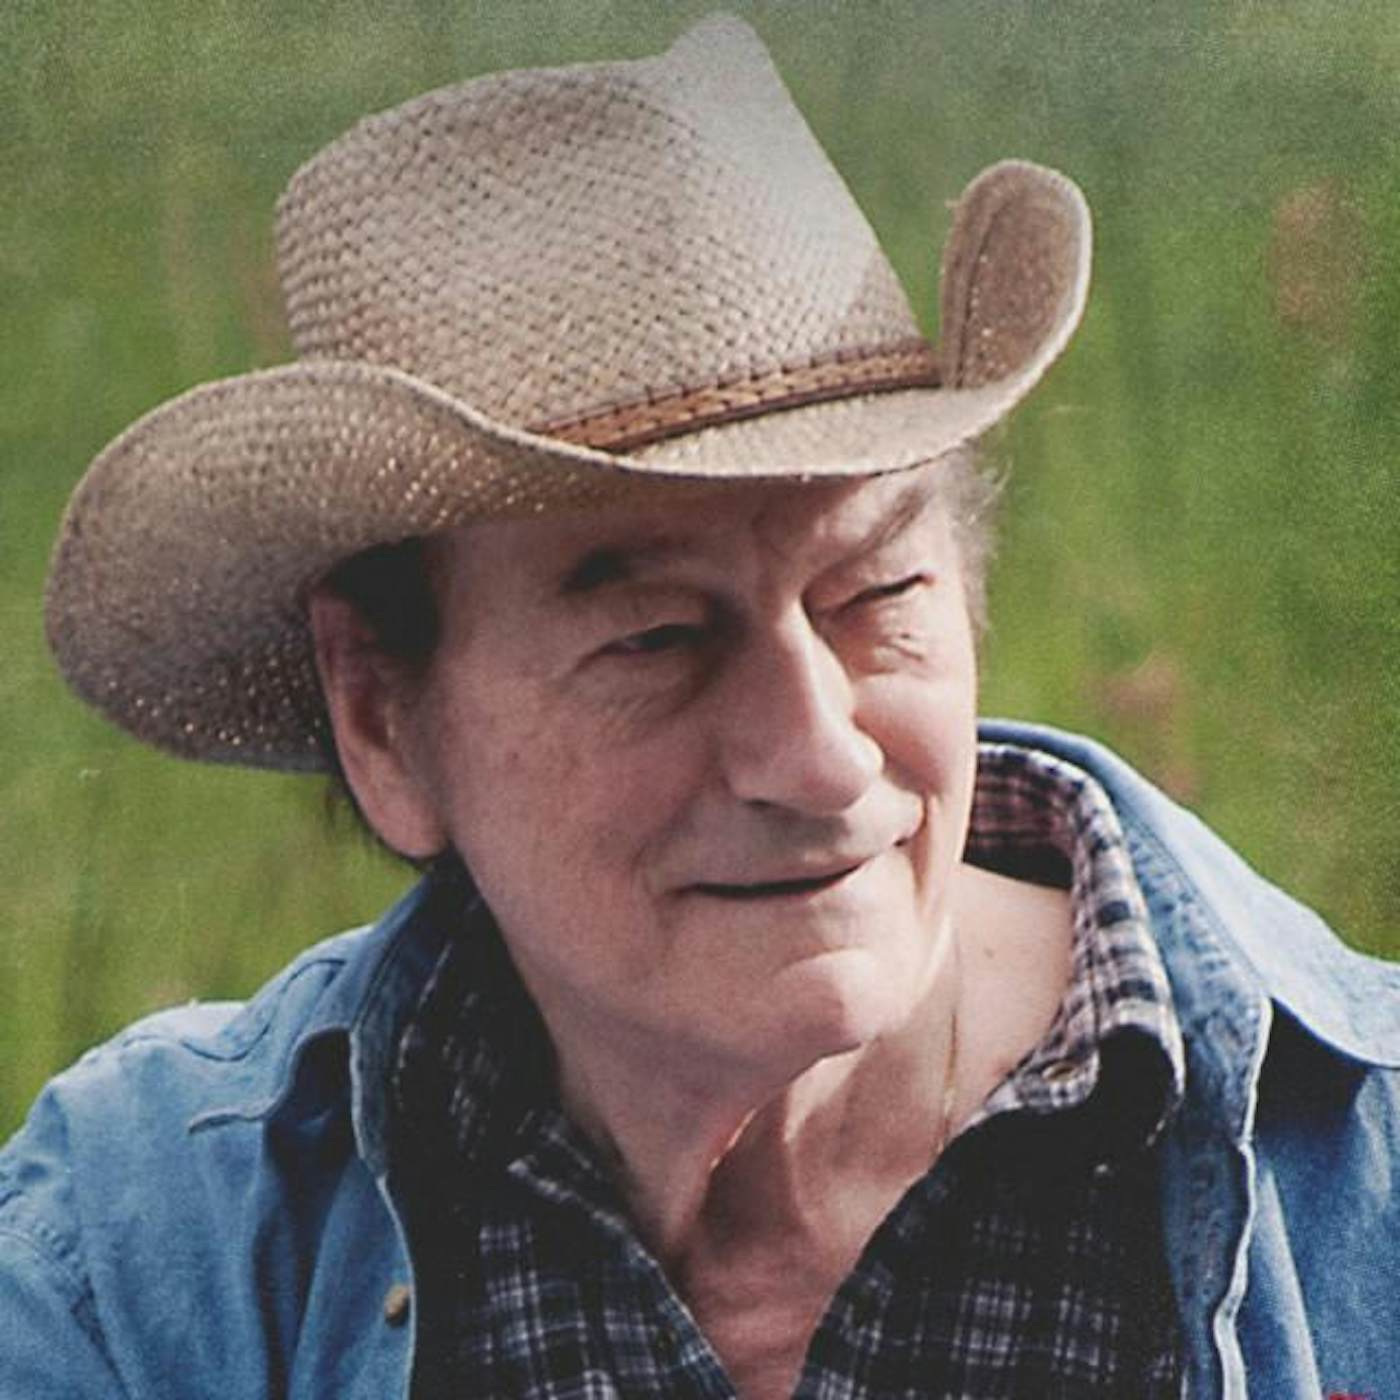 Stompin' Tom Connors